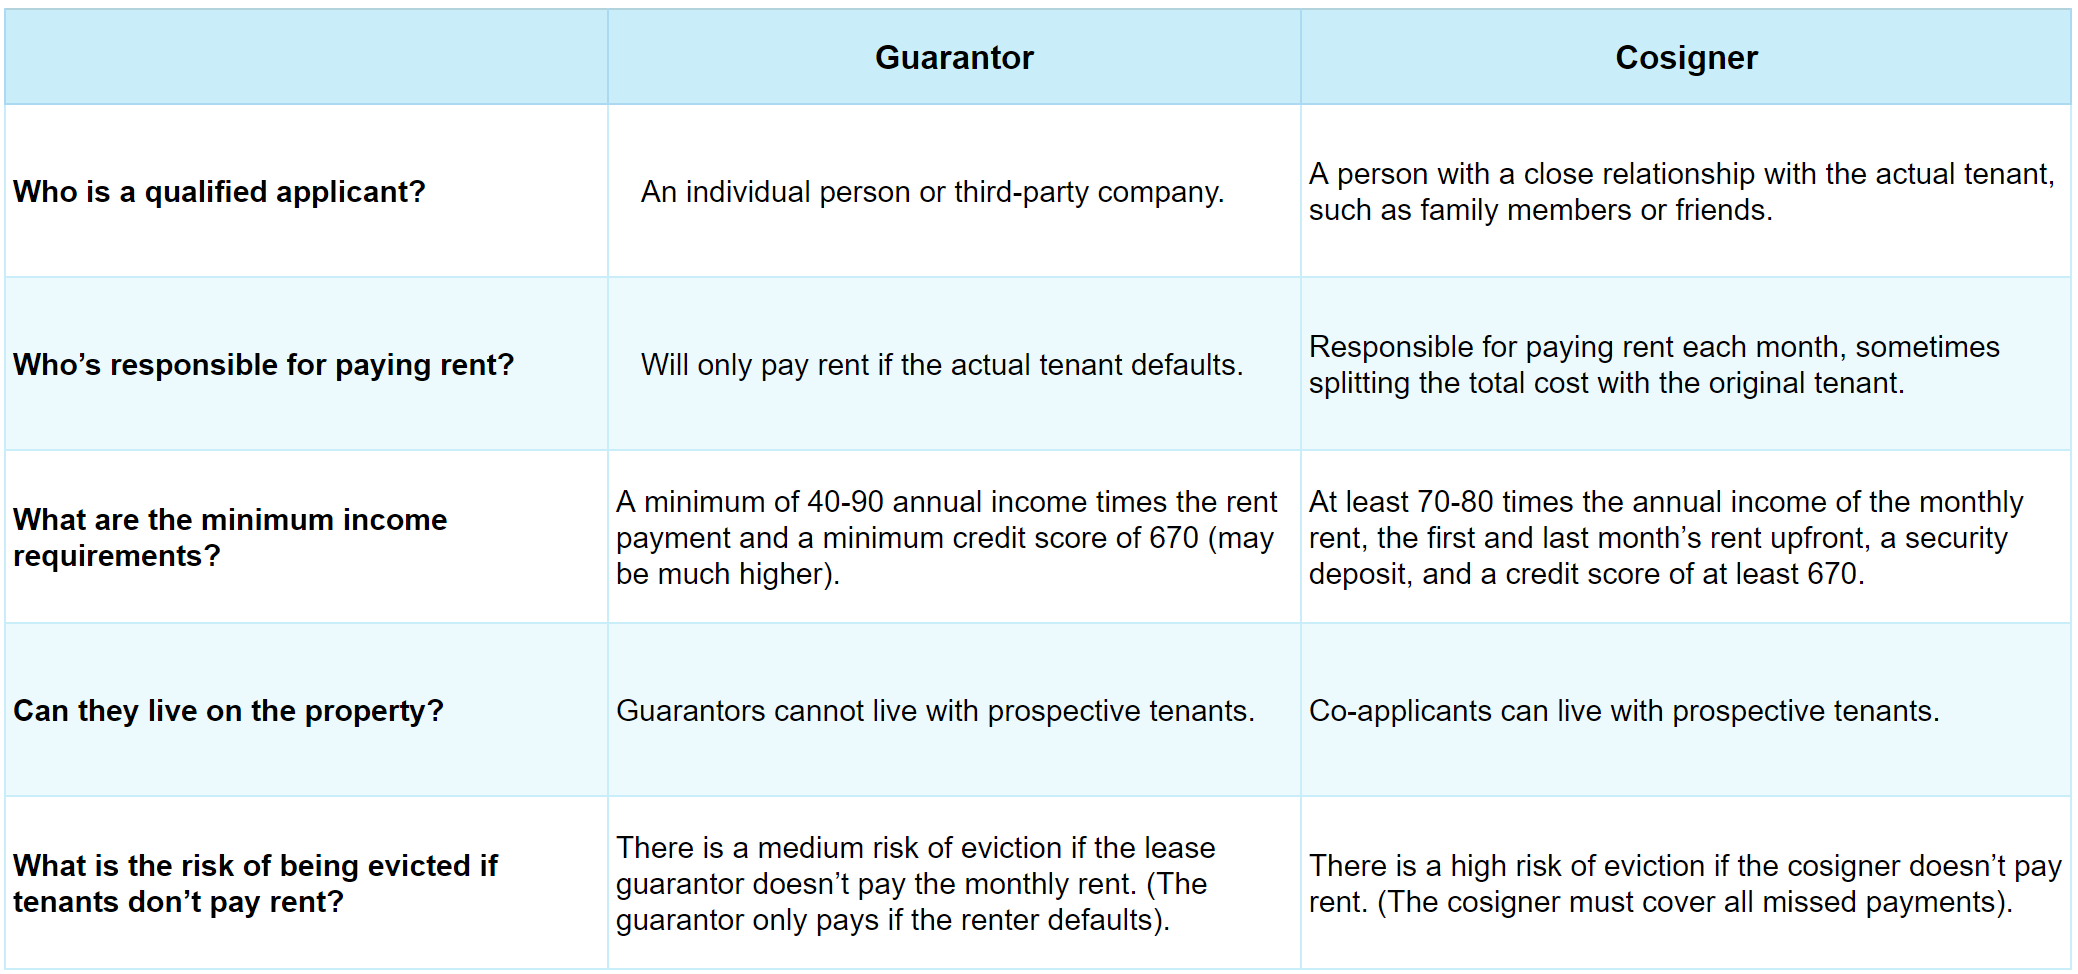 differences guarantor vs. cosigner